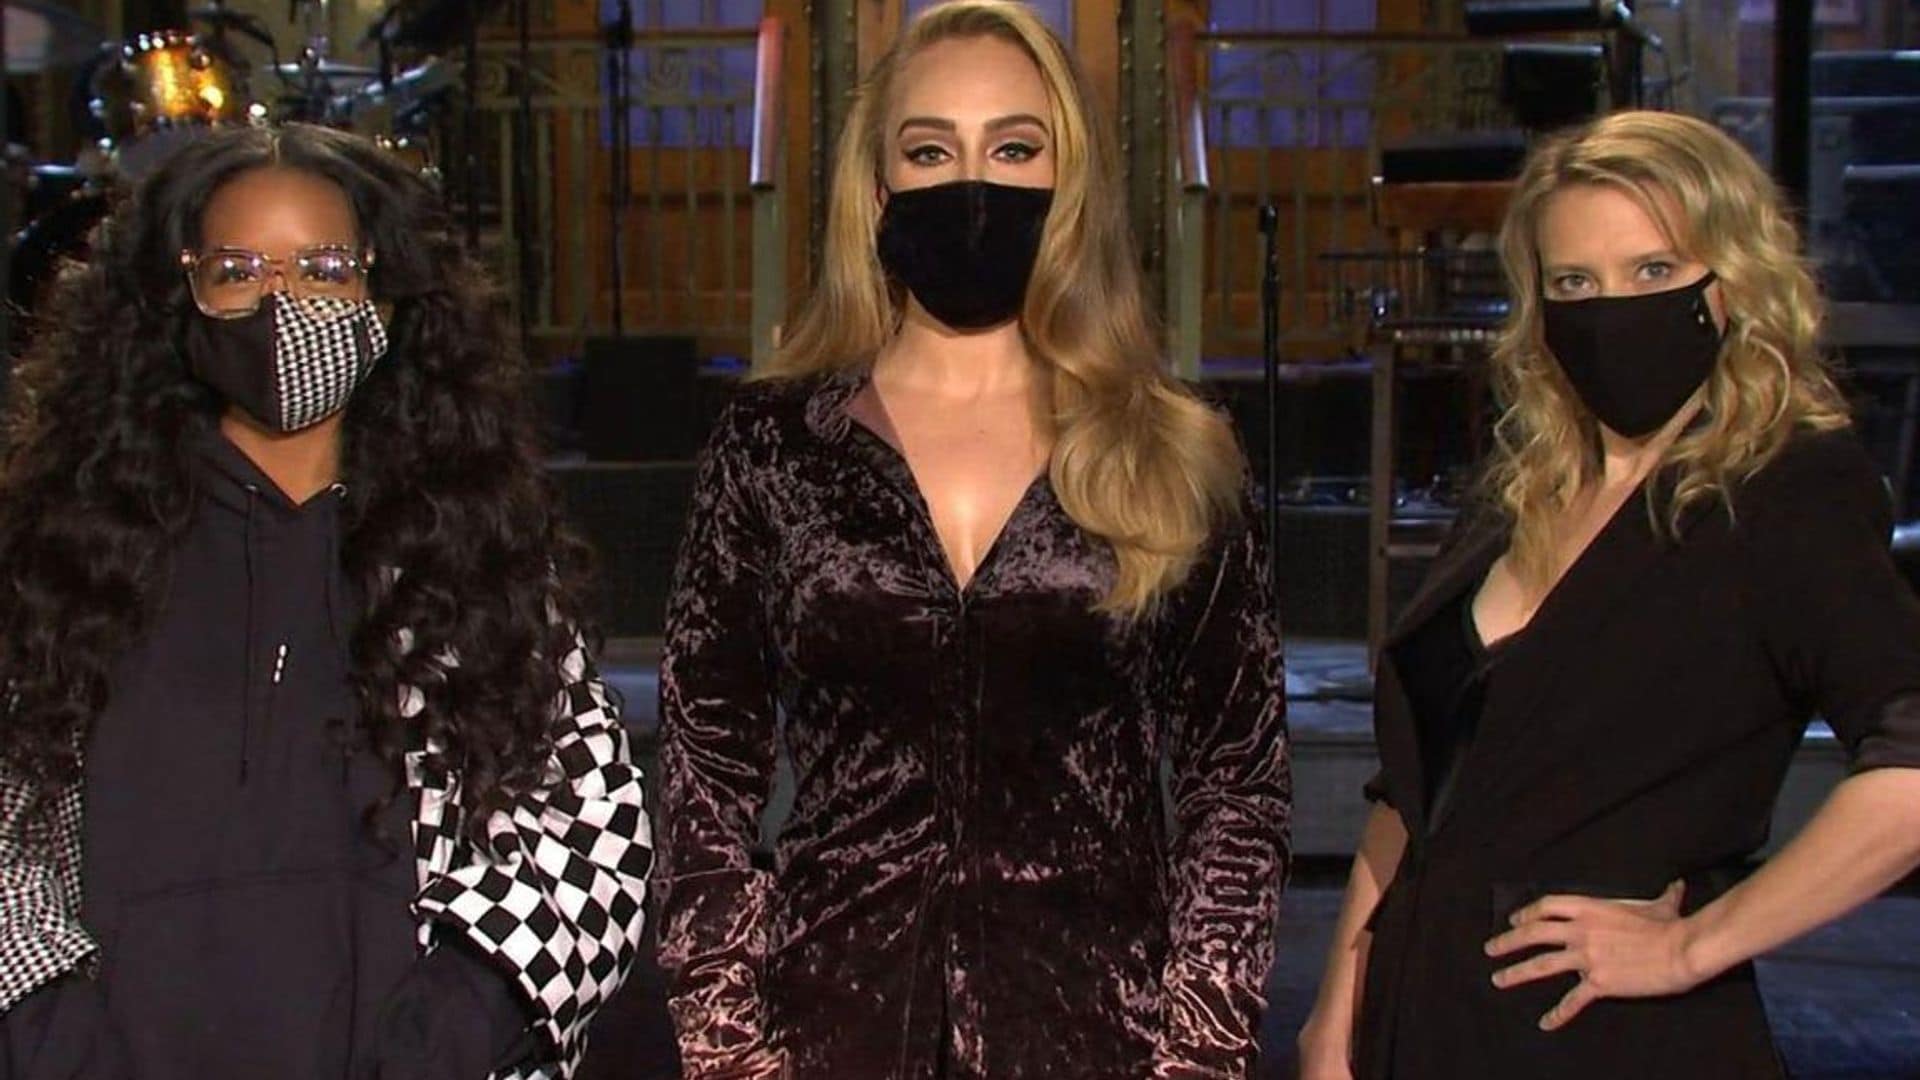 Adele shows off her figure in a body-hugging dress in a ‘SNL’ promo video